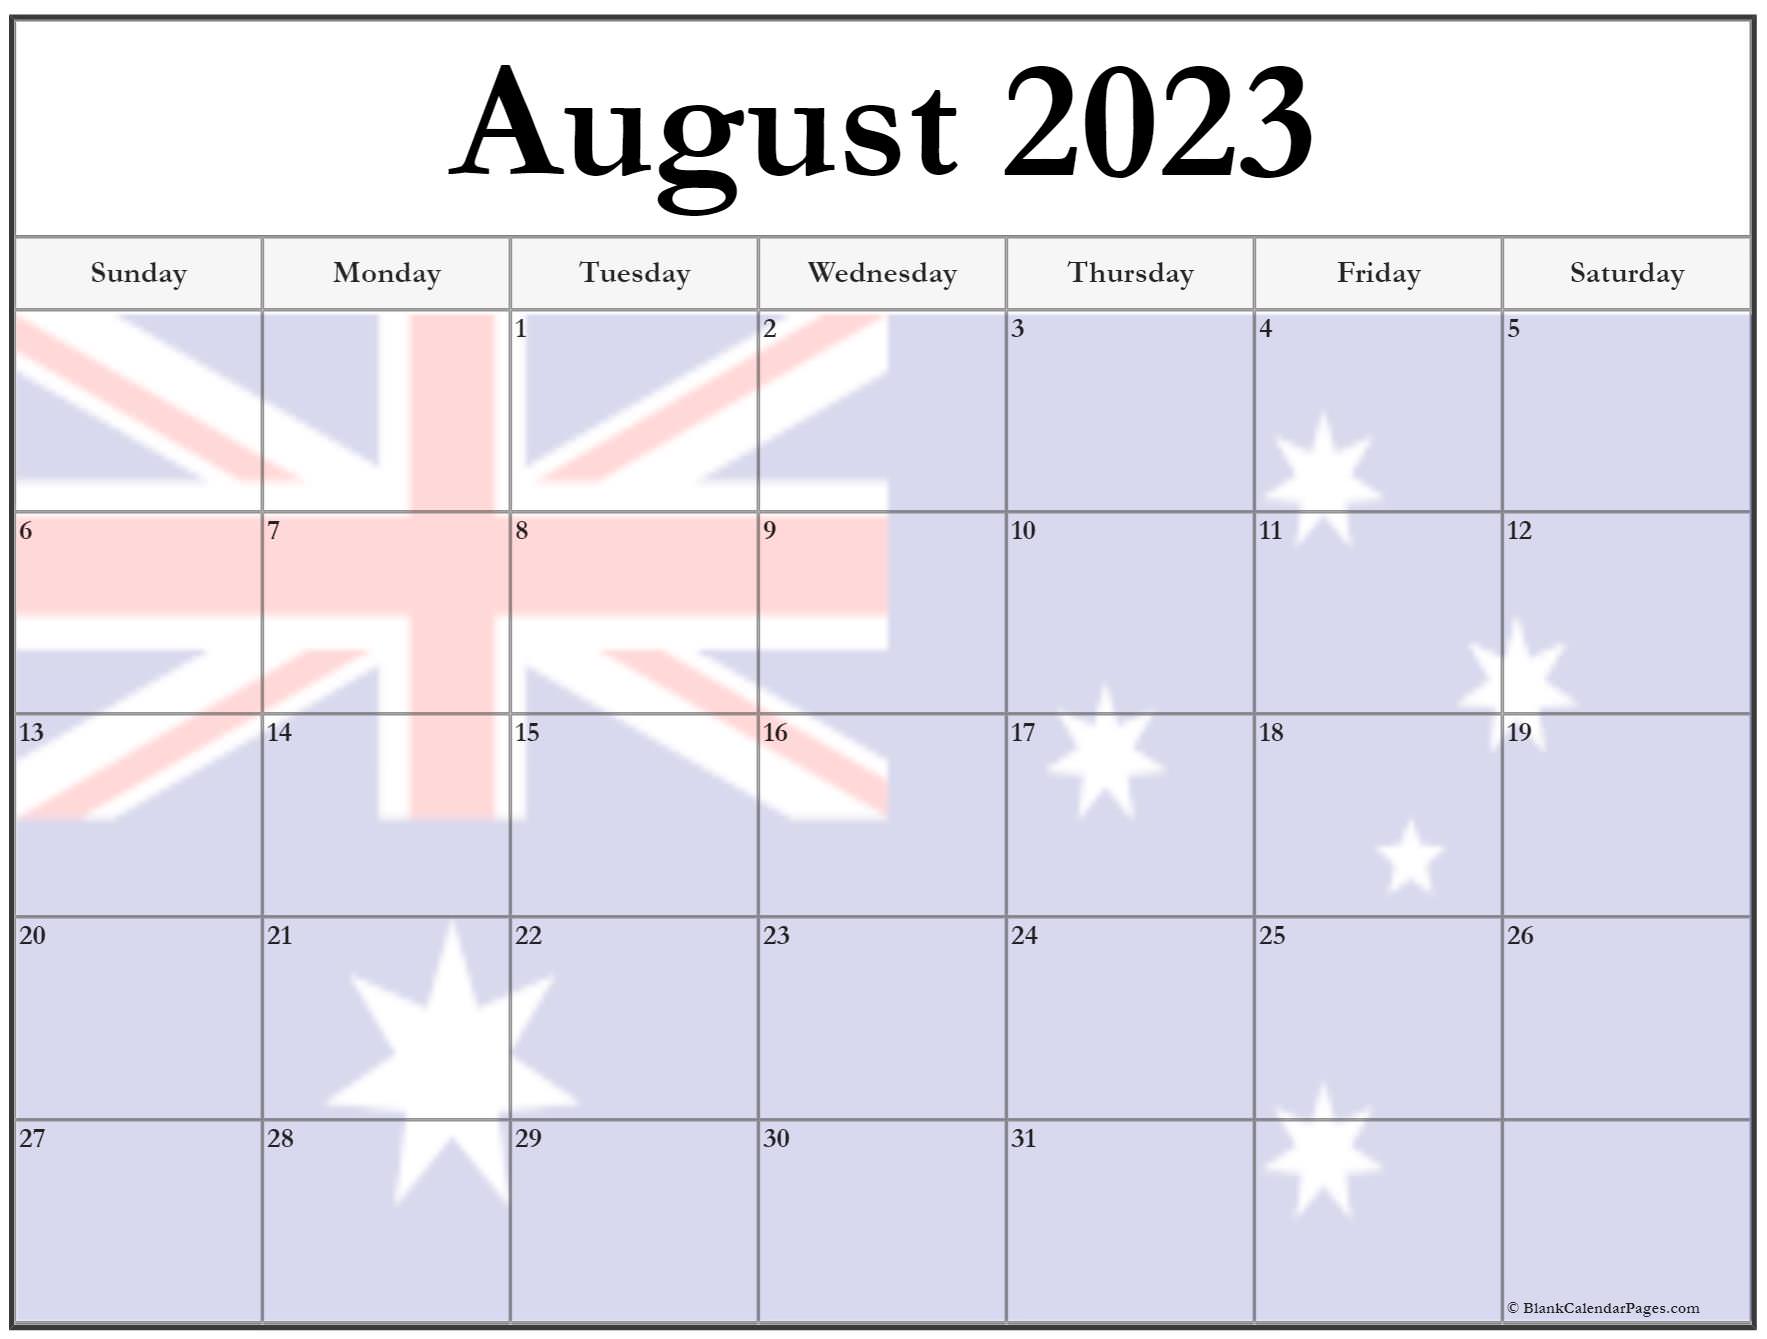 Collection Of August 2023 Photo Calendars With Image Filters 